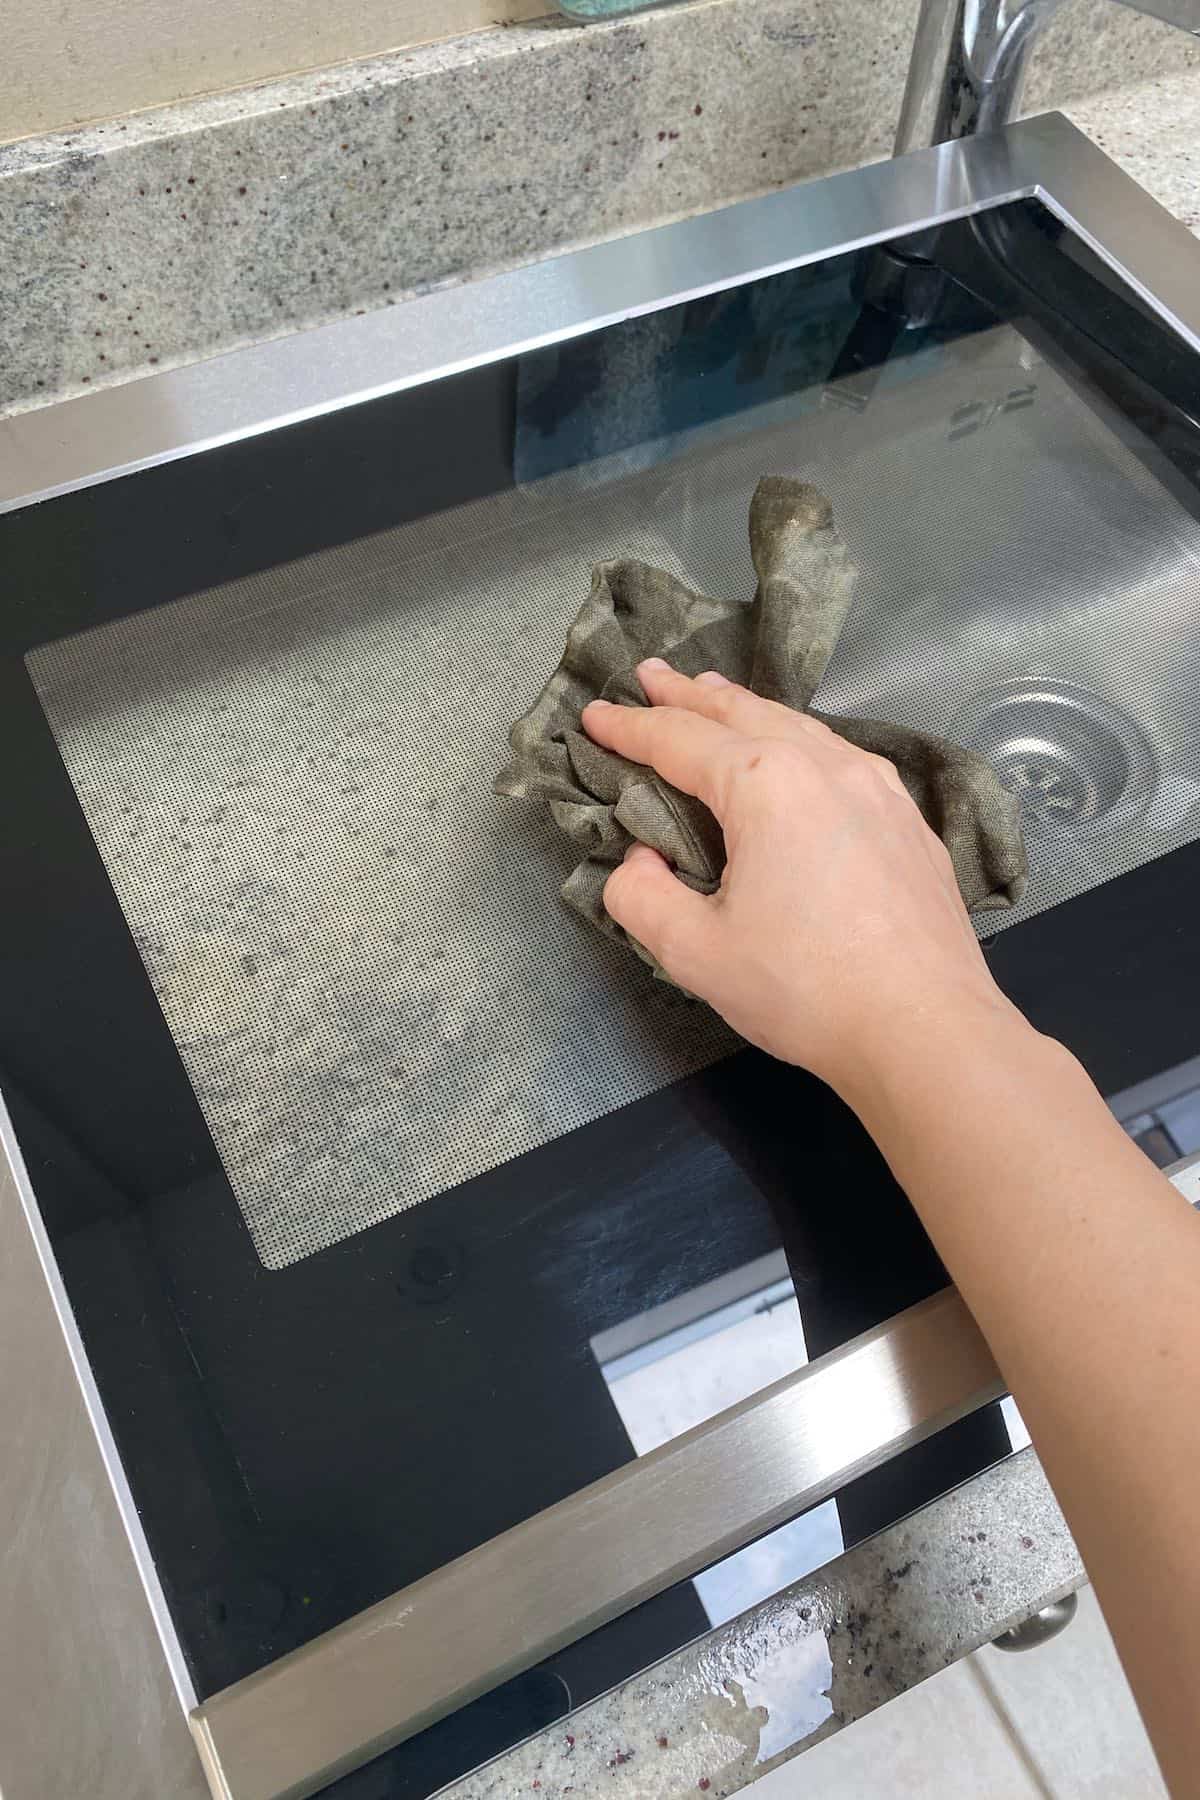 How to Clean an Oven With Baking Soda in 10 Simple Steps